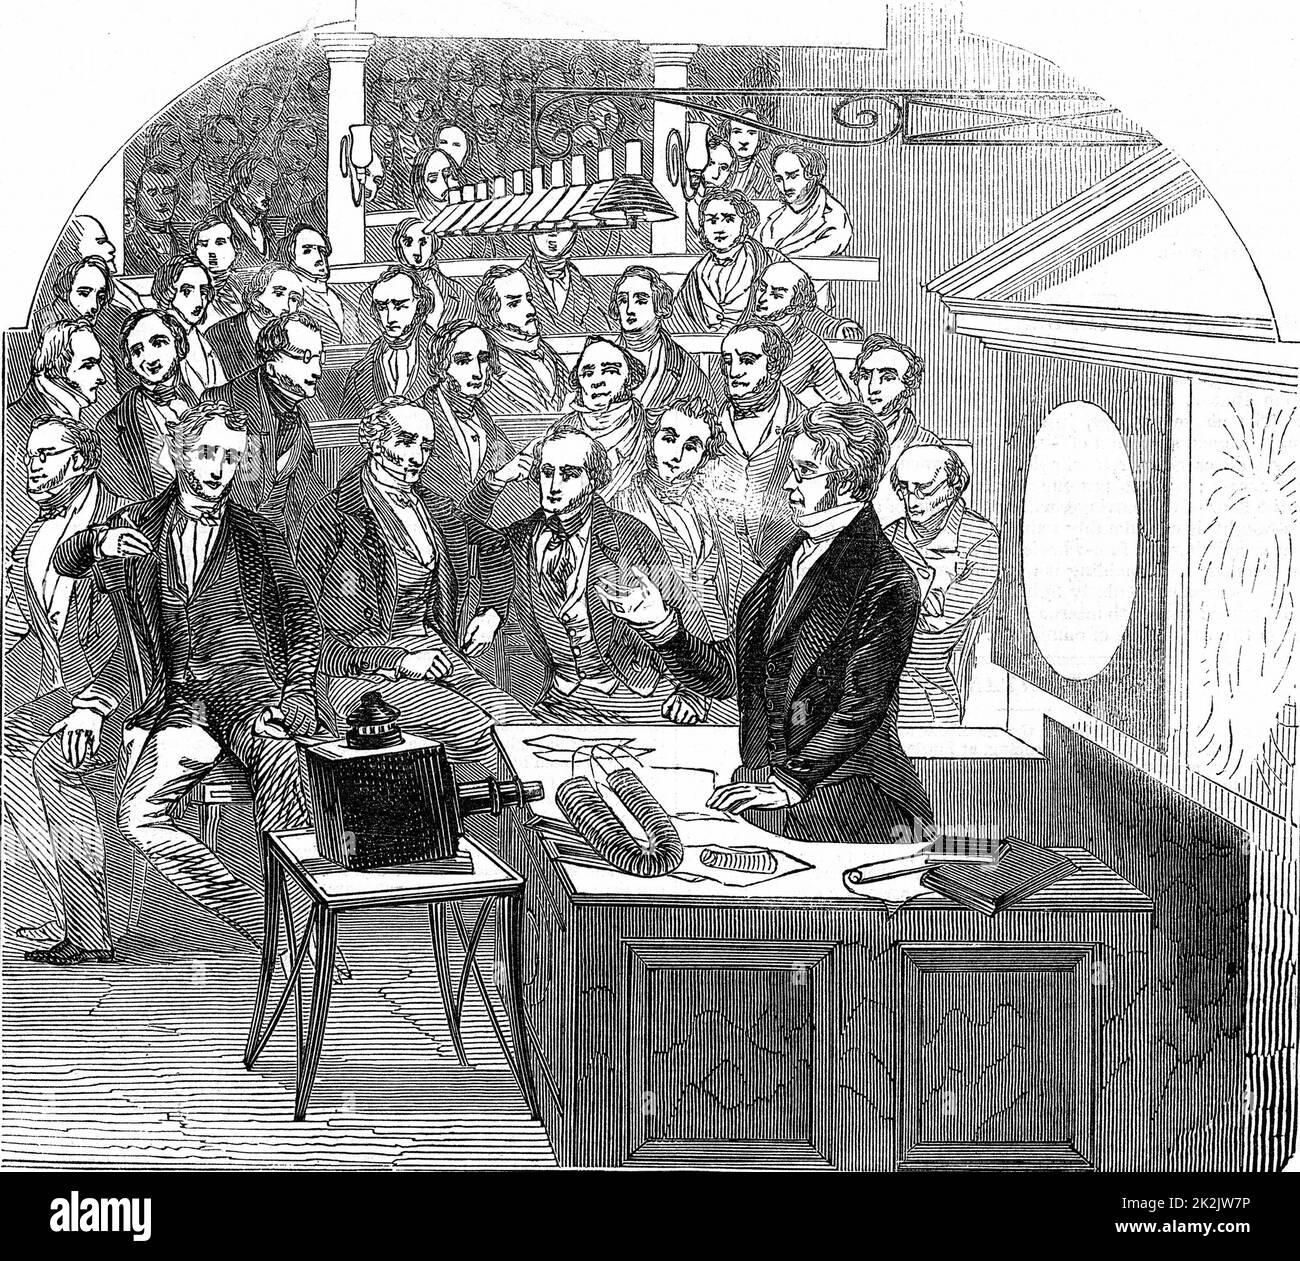 Michael Faraday (1791-1867) British chemist and physicist, lecturing on electricity and magnetism Royal Institution, London, 23 January 1846. Wood engraving. Stock Photo